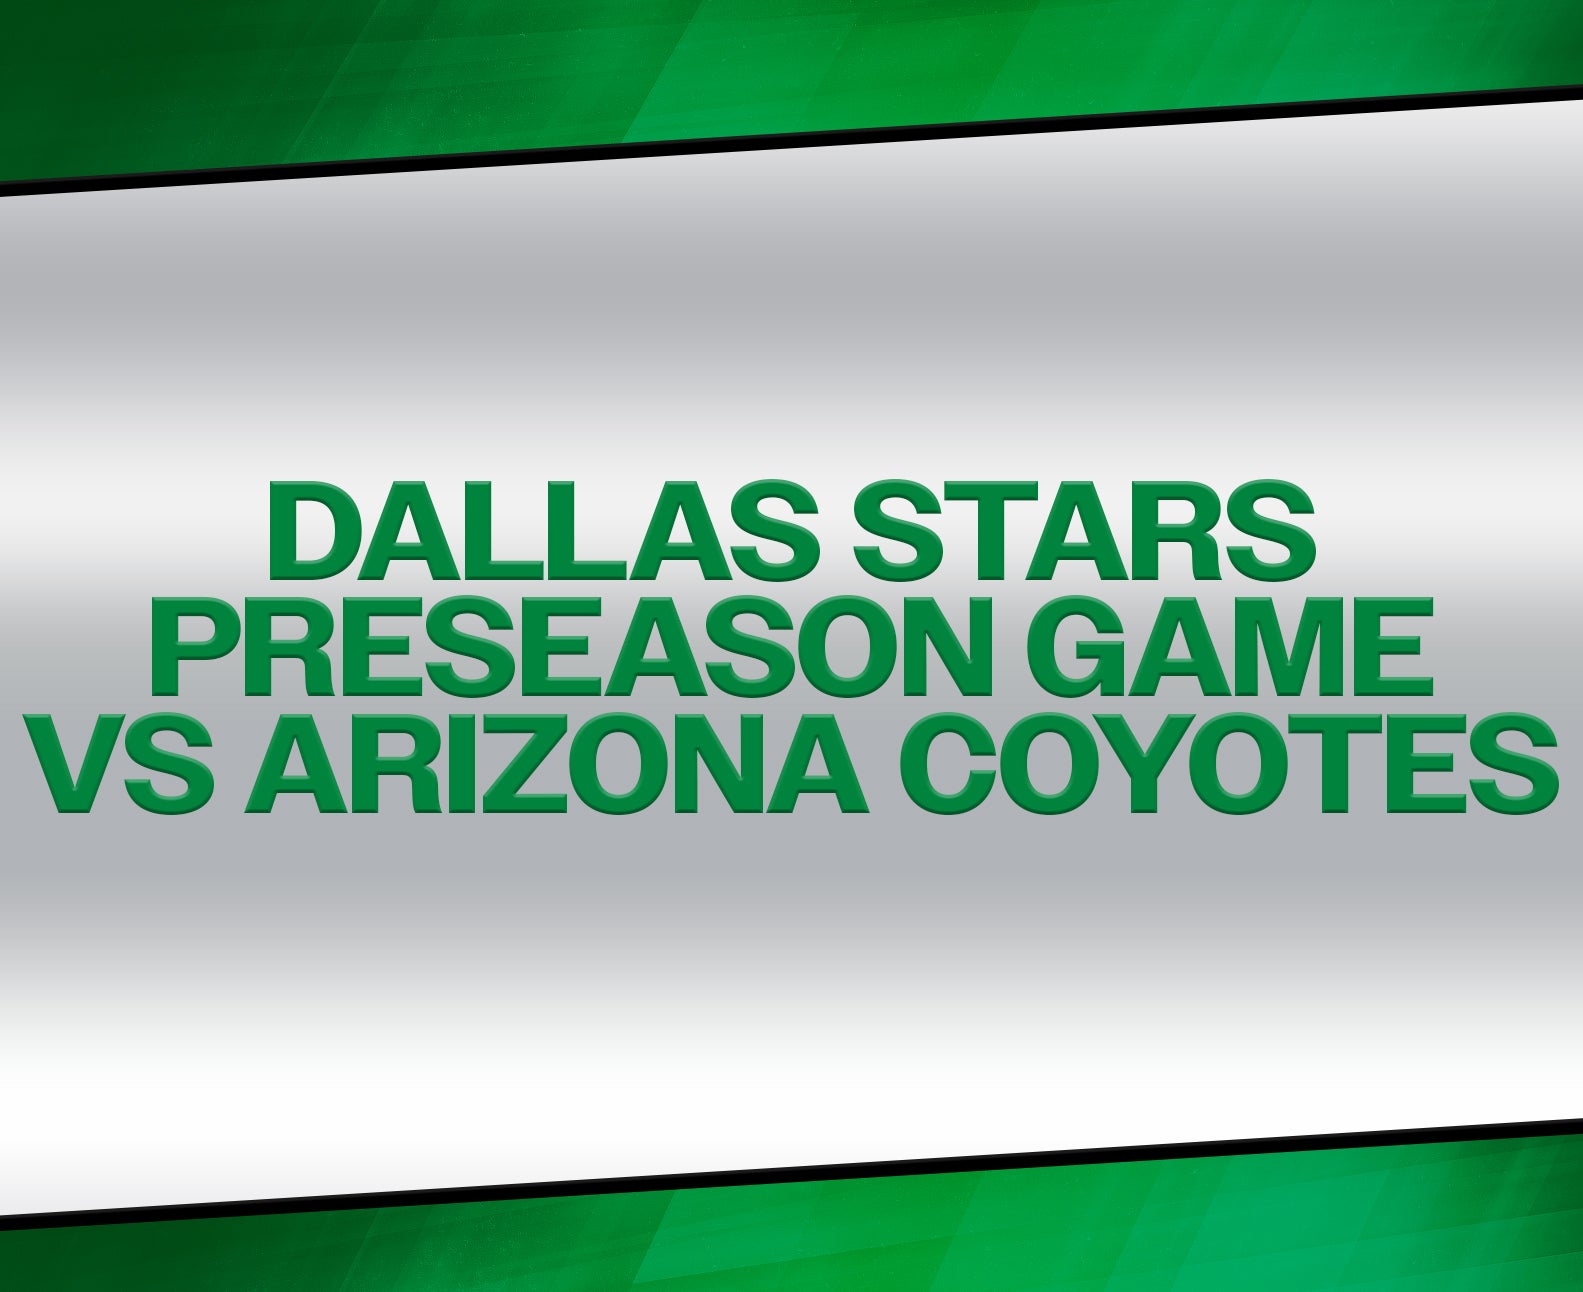 Here's how to get tickets to Dallas Stars home games for the